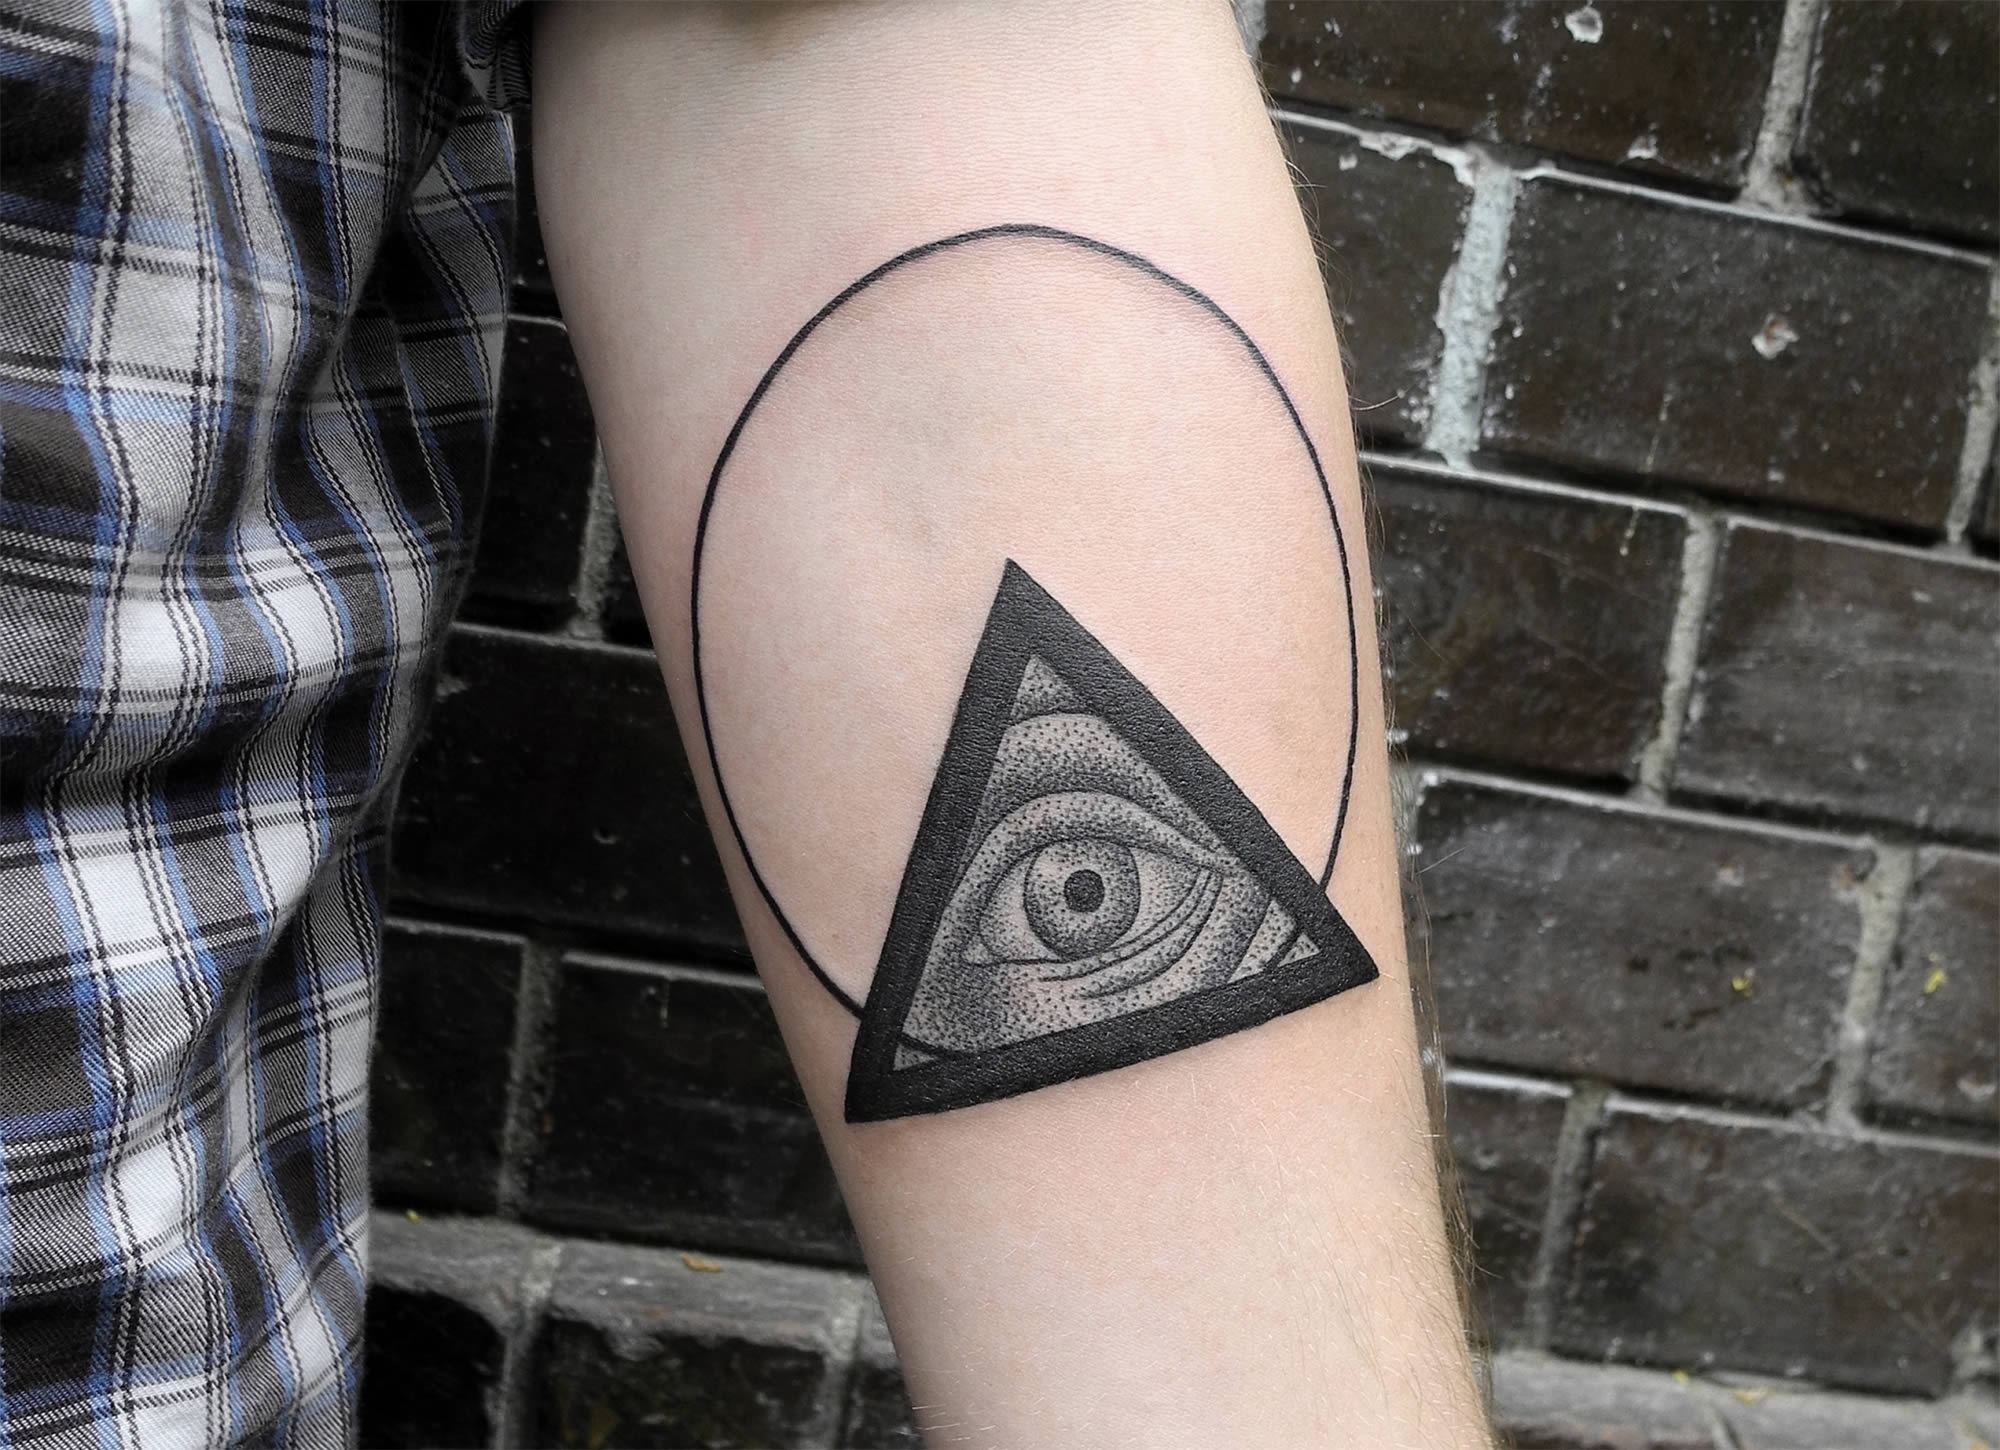 Tattoos of the Mighty “Eye of Providence” – Scene360